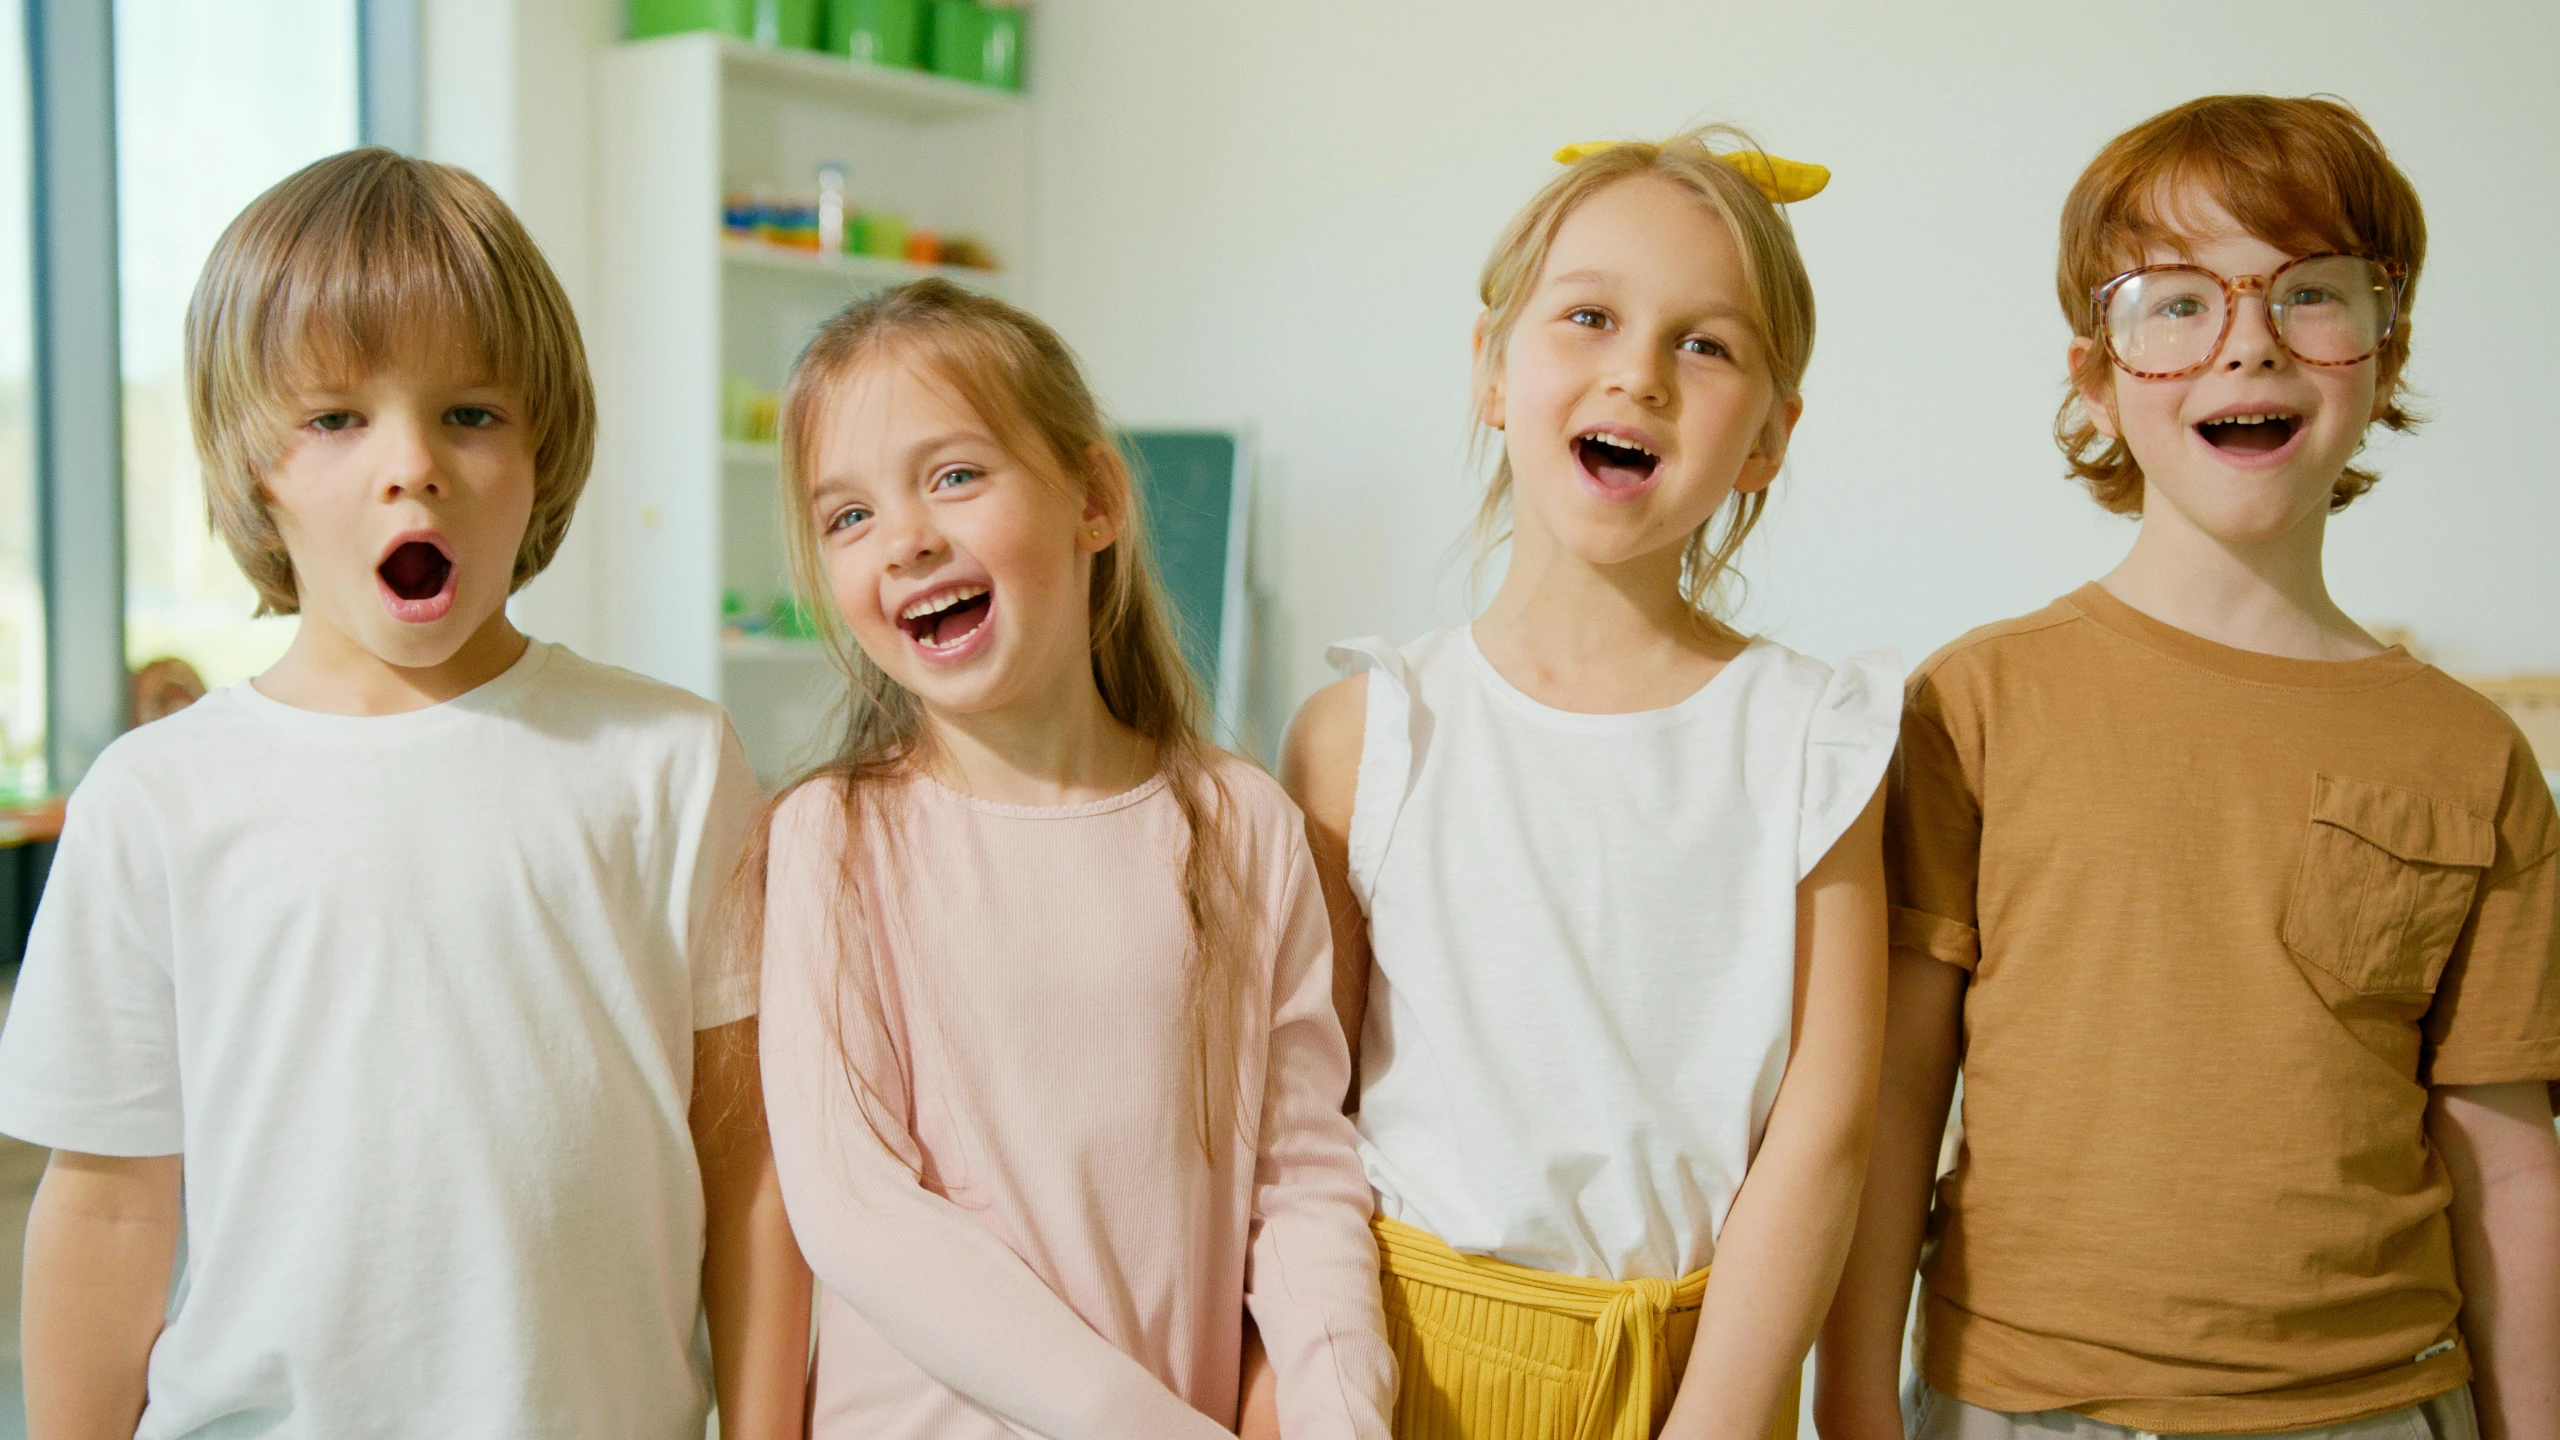 a group of young children standing next to each other, pexels, earing a shirt laughing, a girl with blonde hair, performing, looking straight forward